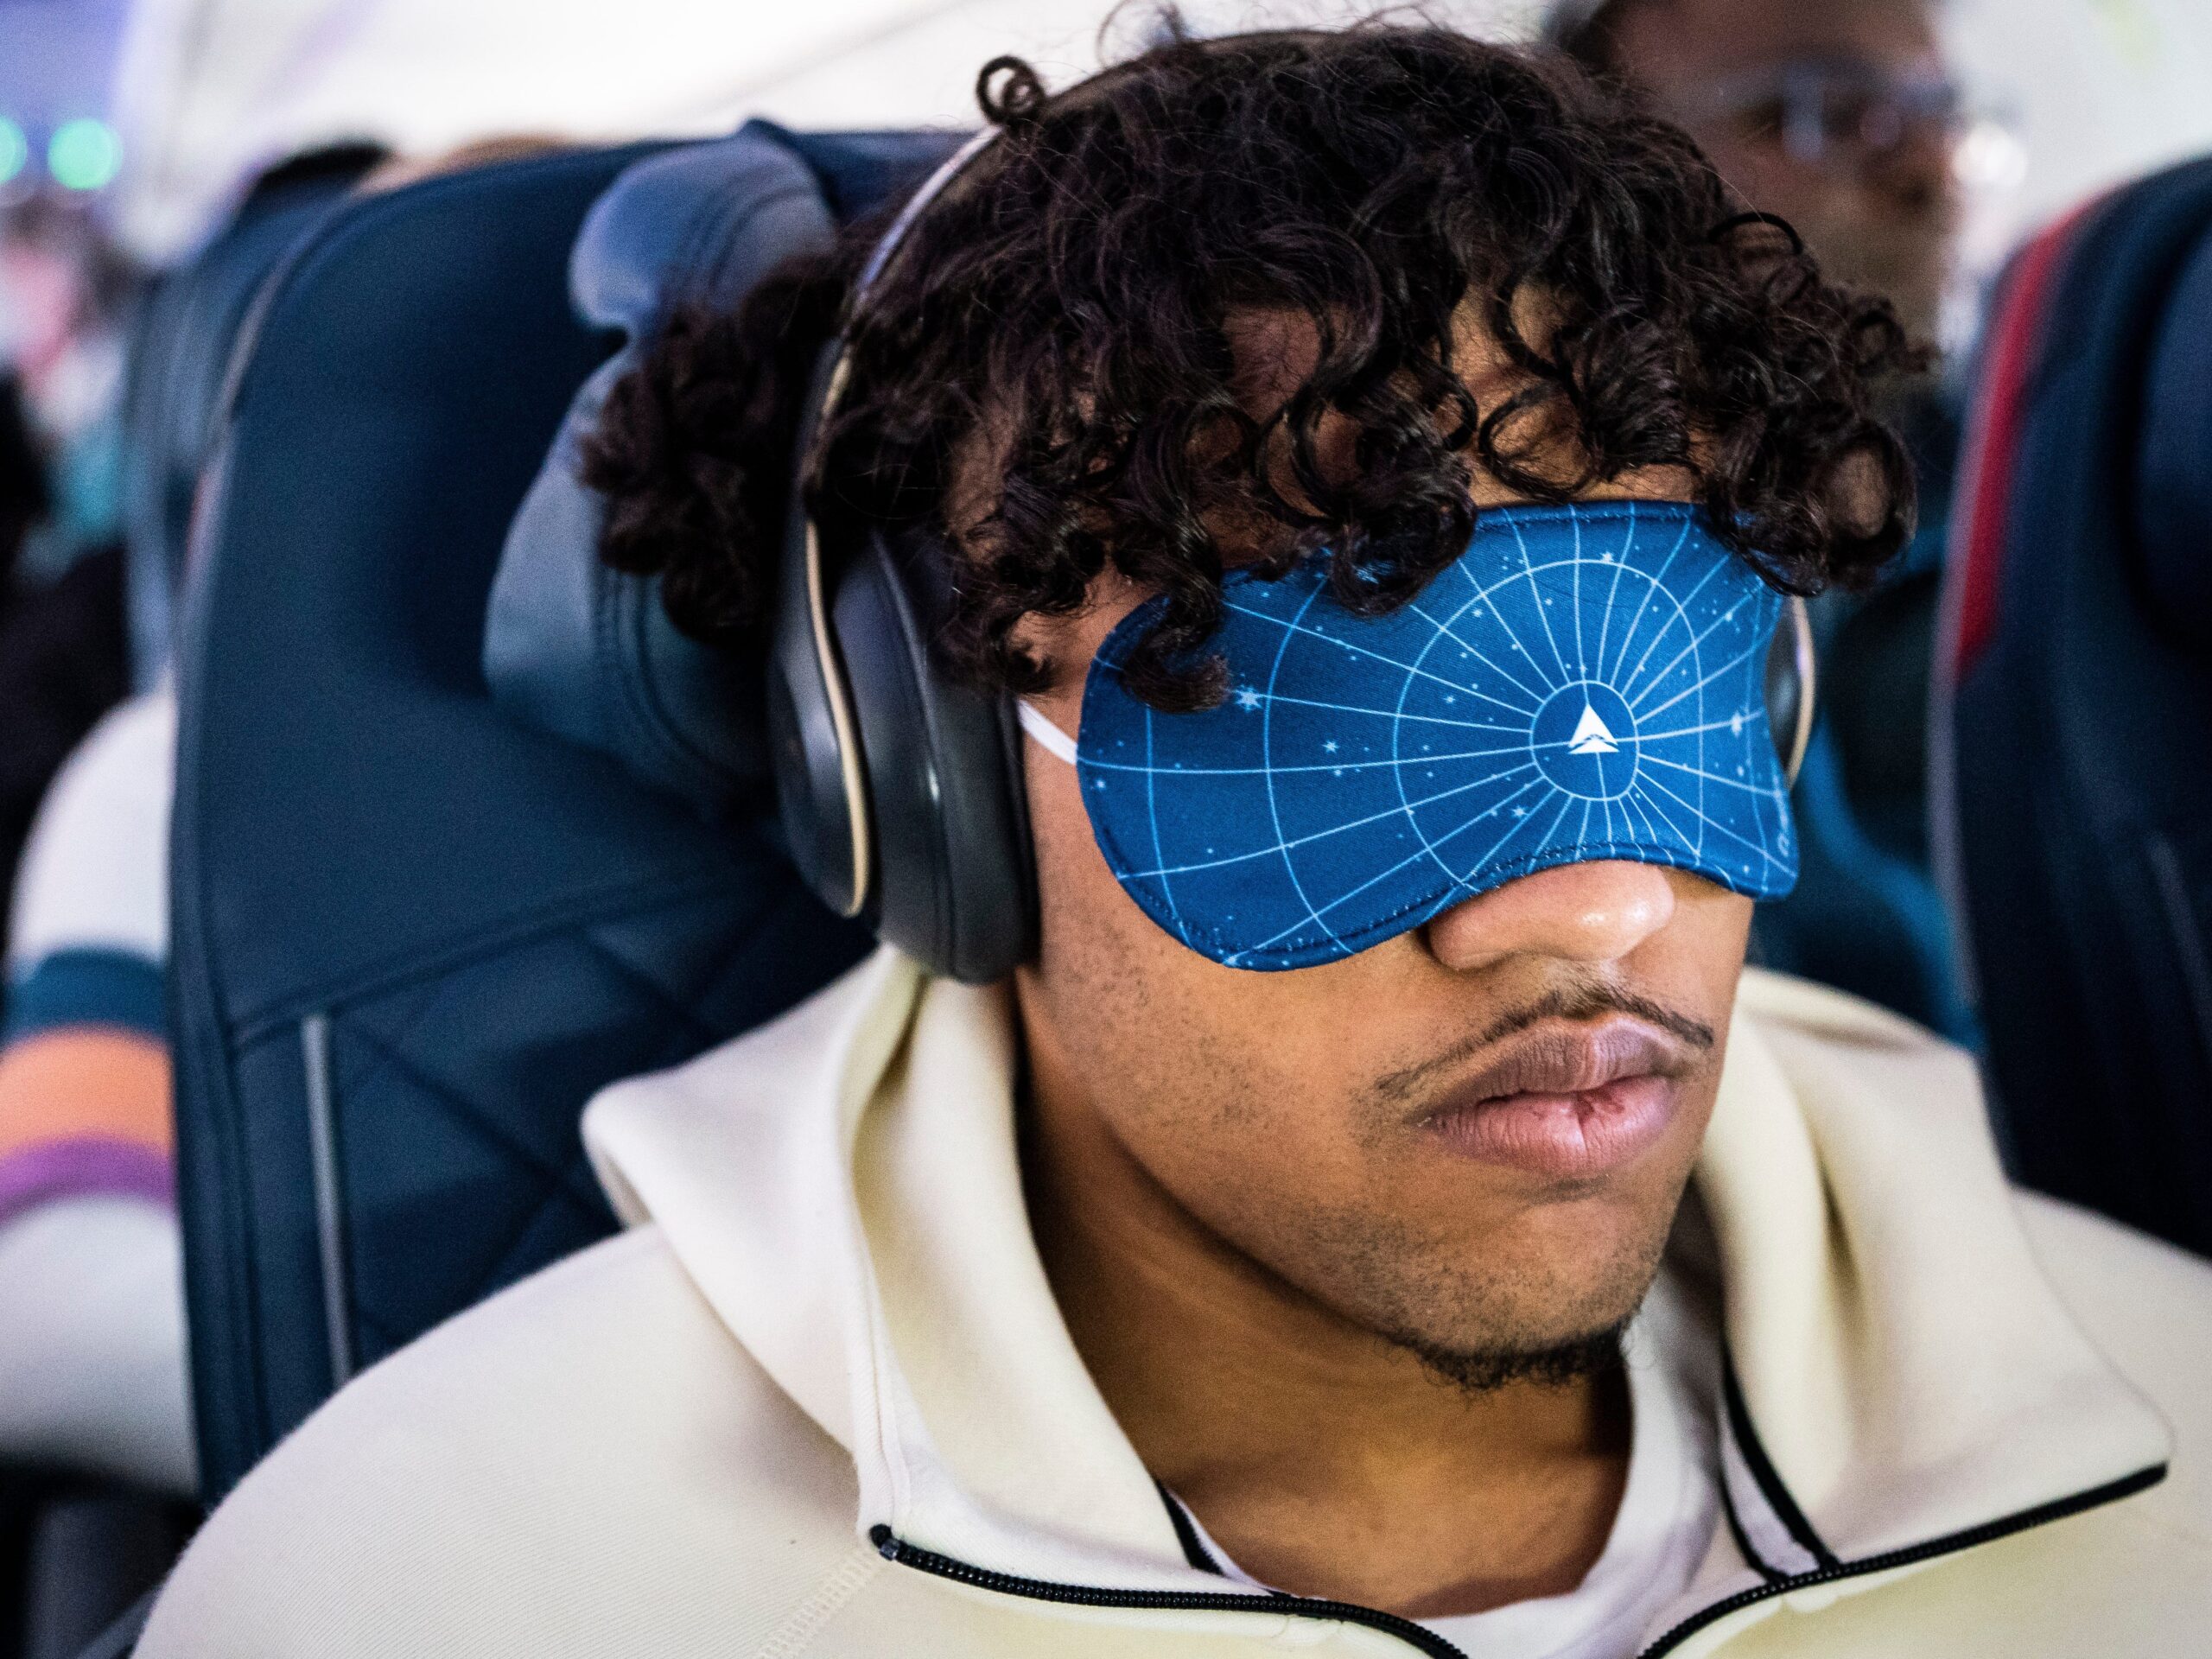 A passenger wear his special edition eye mask during a path of totality Delta Airlines flight from Dallas to Detroit, at Dallas Fort Worth International Airport.